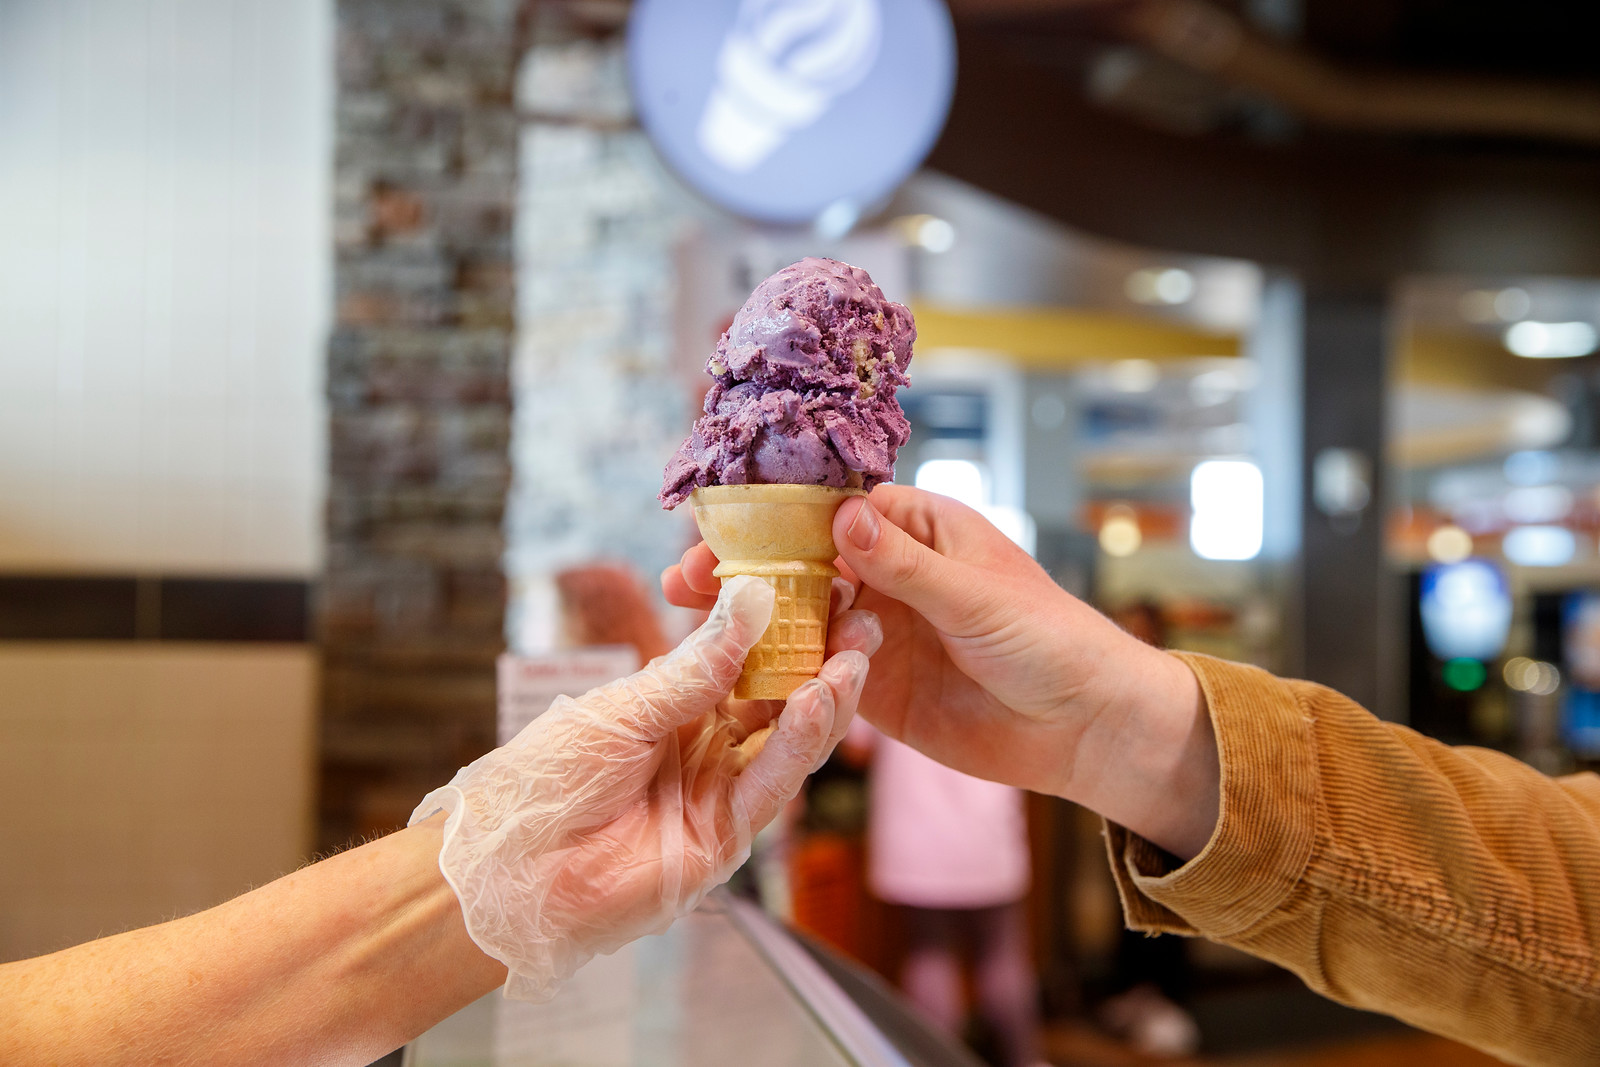 Dining staff member hands a hand dipped gelato cone to a customer